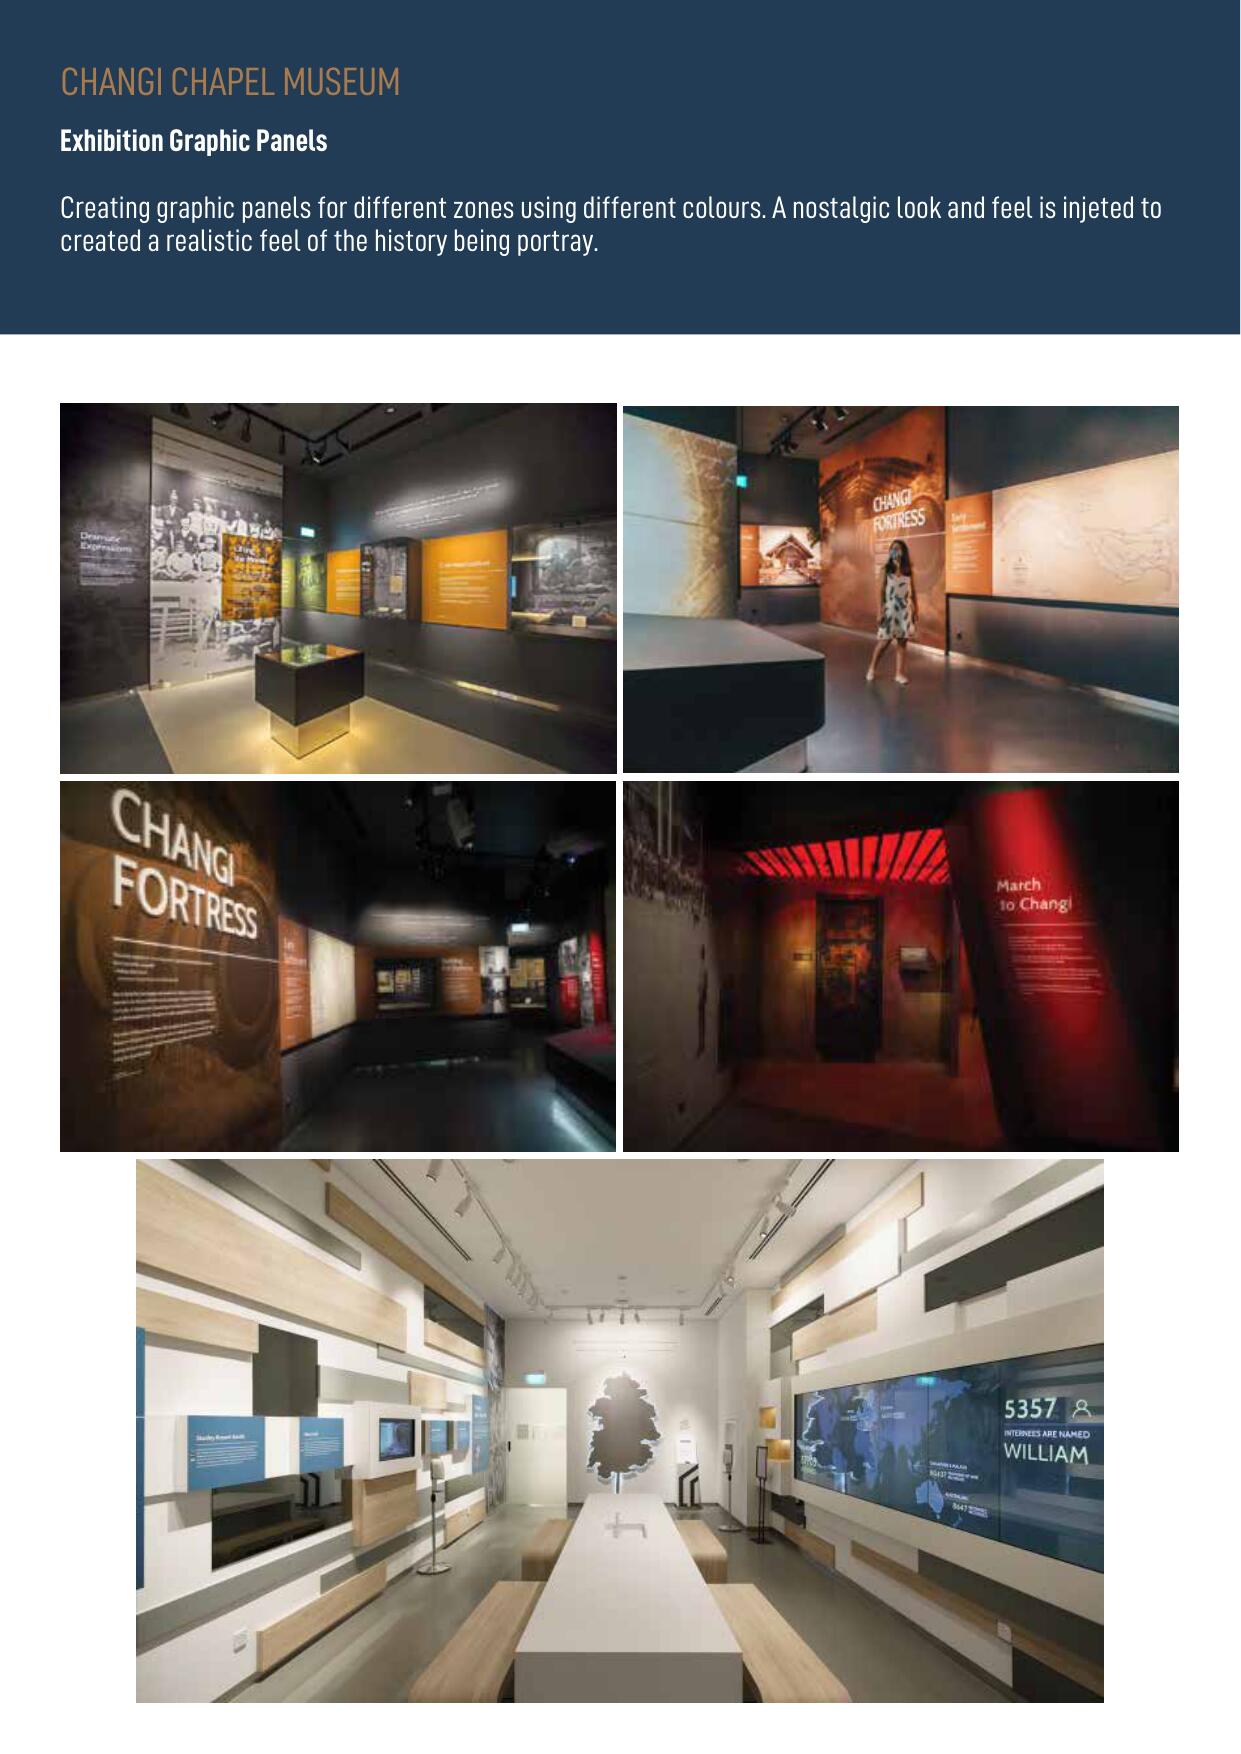 Exhibition Graphic Panels

Creating graphic panels for different zones using different colours. A nostalgic look and feel is injeted to
created a realistic feel of the history being portray.

[yy

WILLIAM